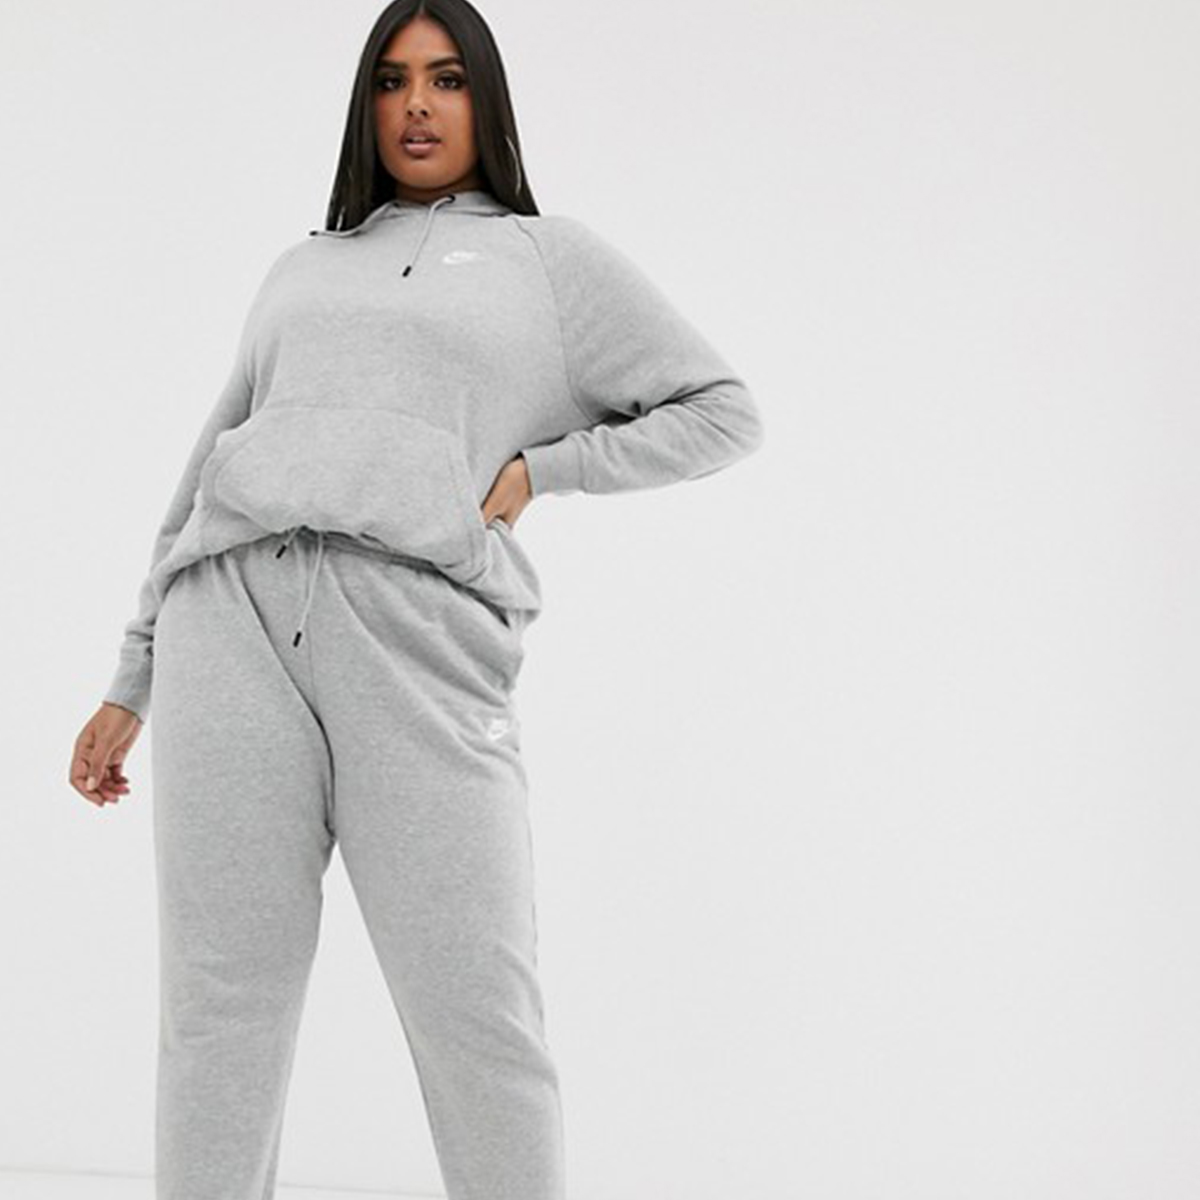 women's nike jogger outfits